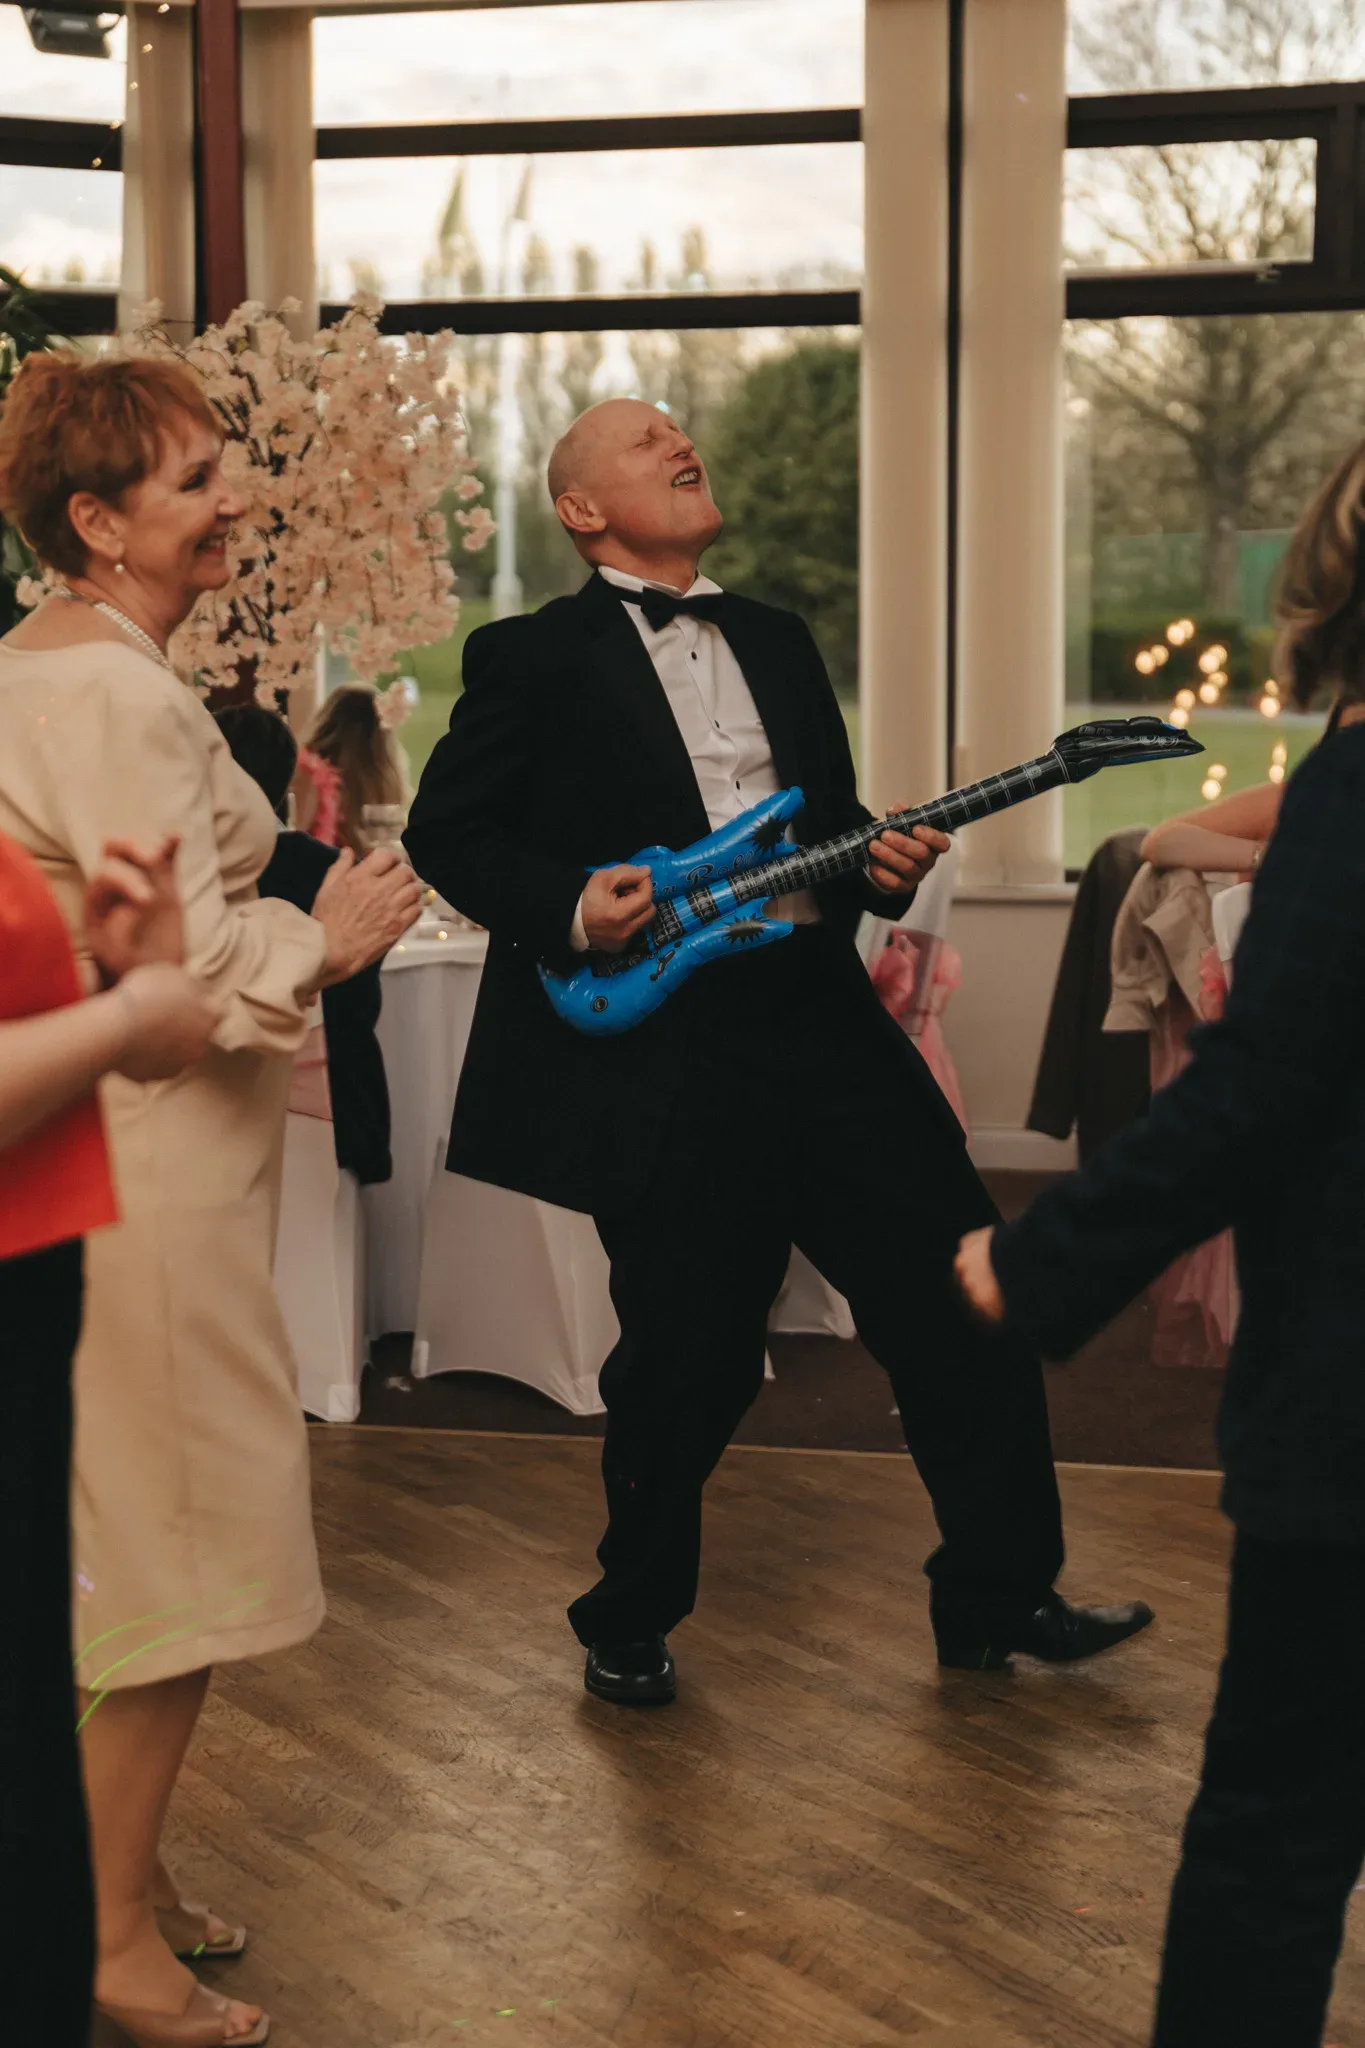 An elderly man joyfully plays a blue toy guitar at a party. he's dressed in a formal black suit and is surrounded by clapping guests, including an amused elderly woman, in a room with large windows and pink decor.